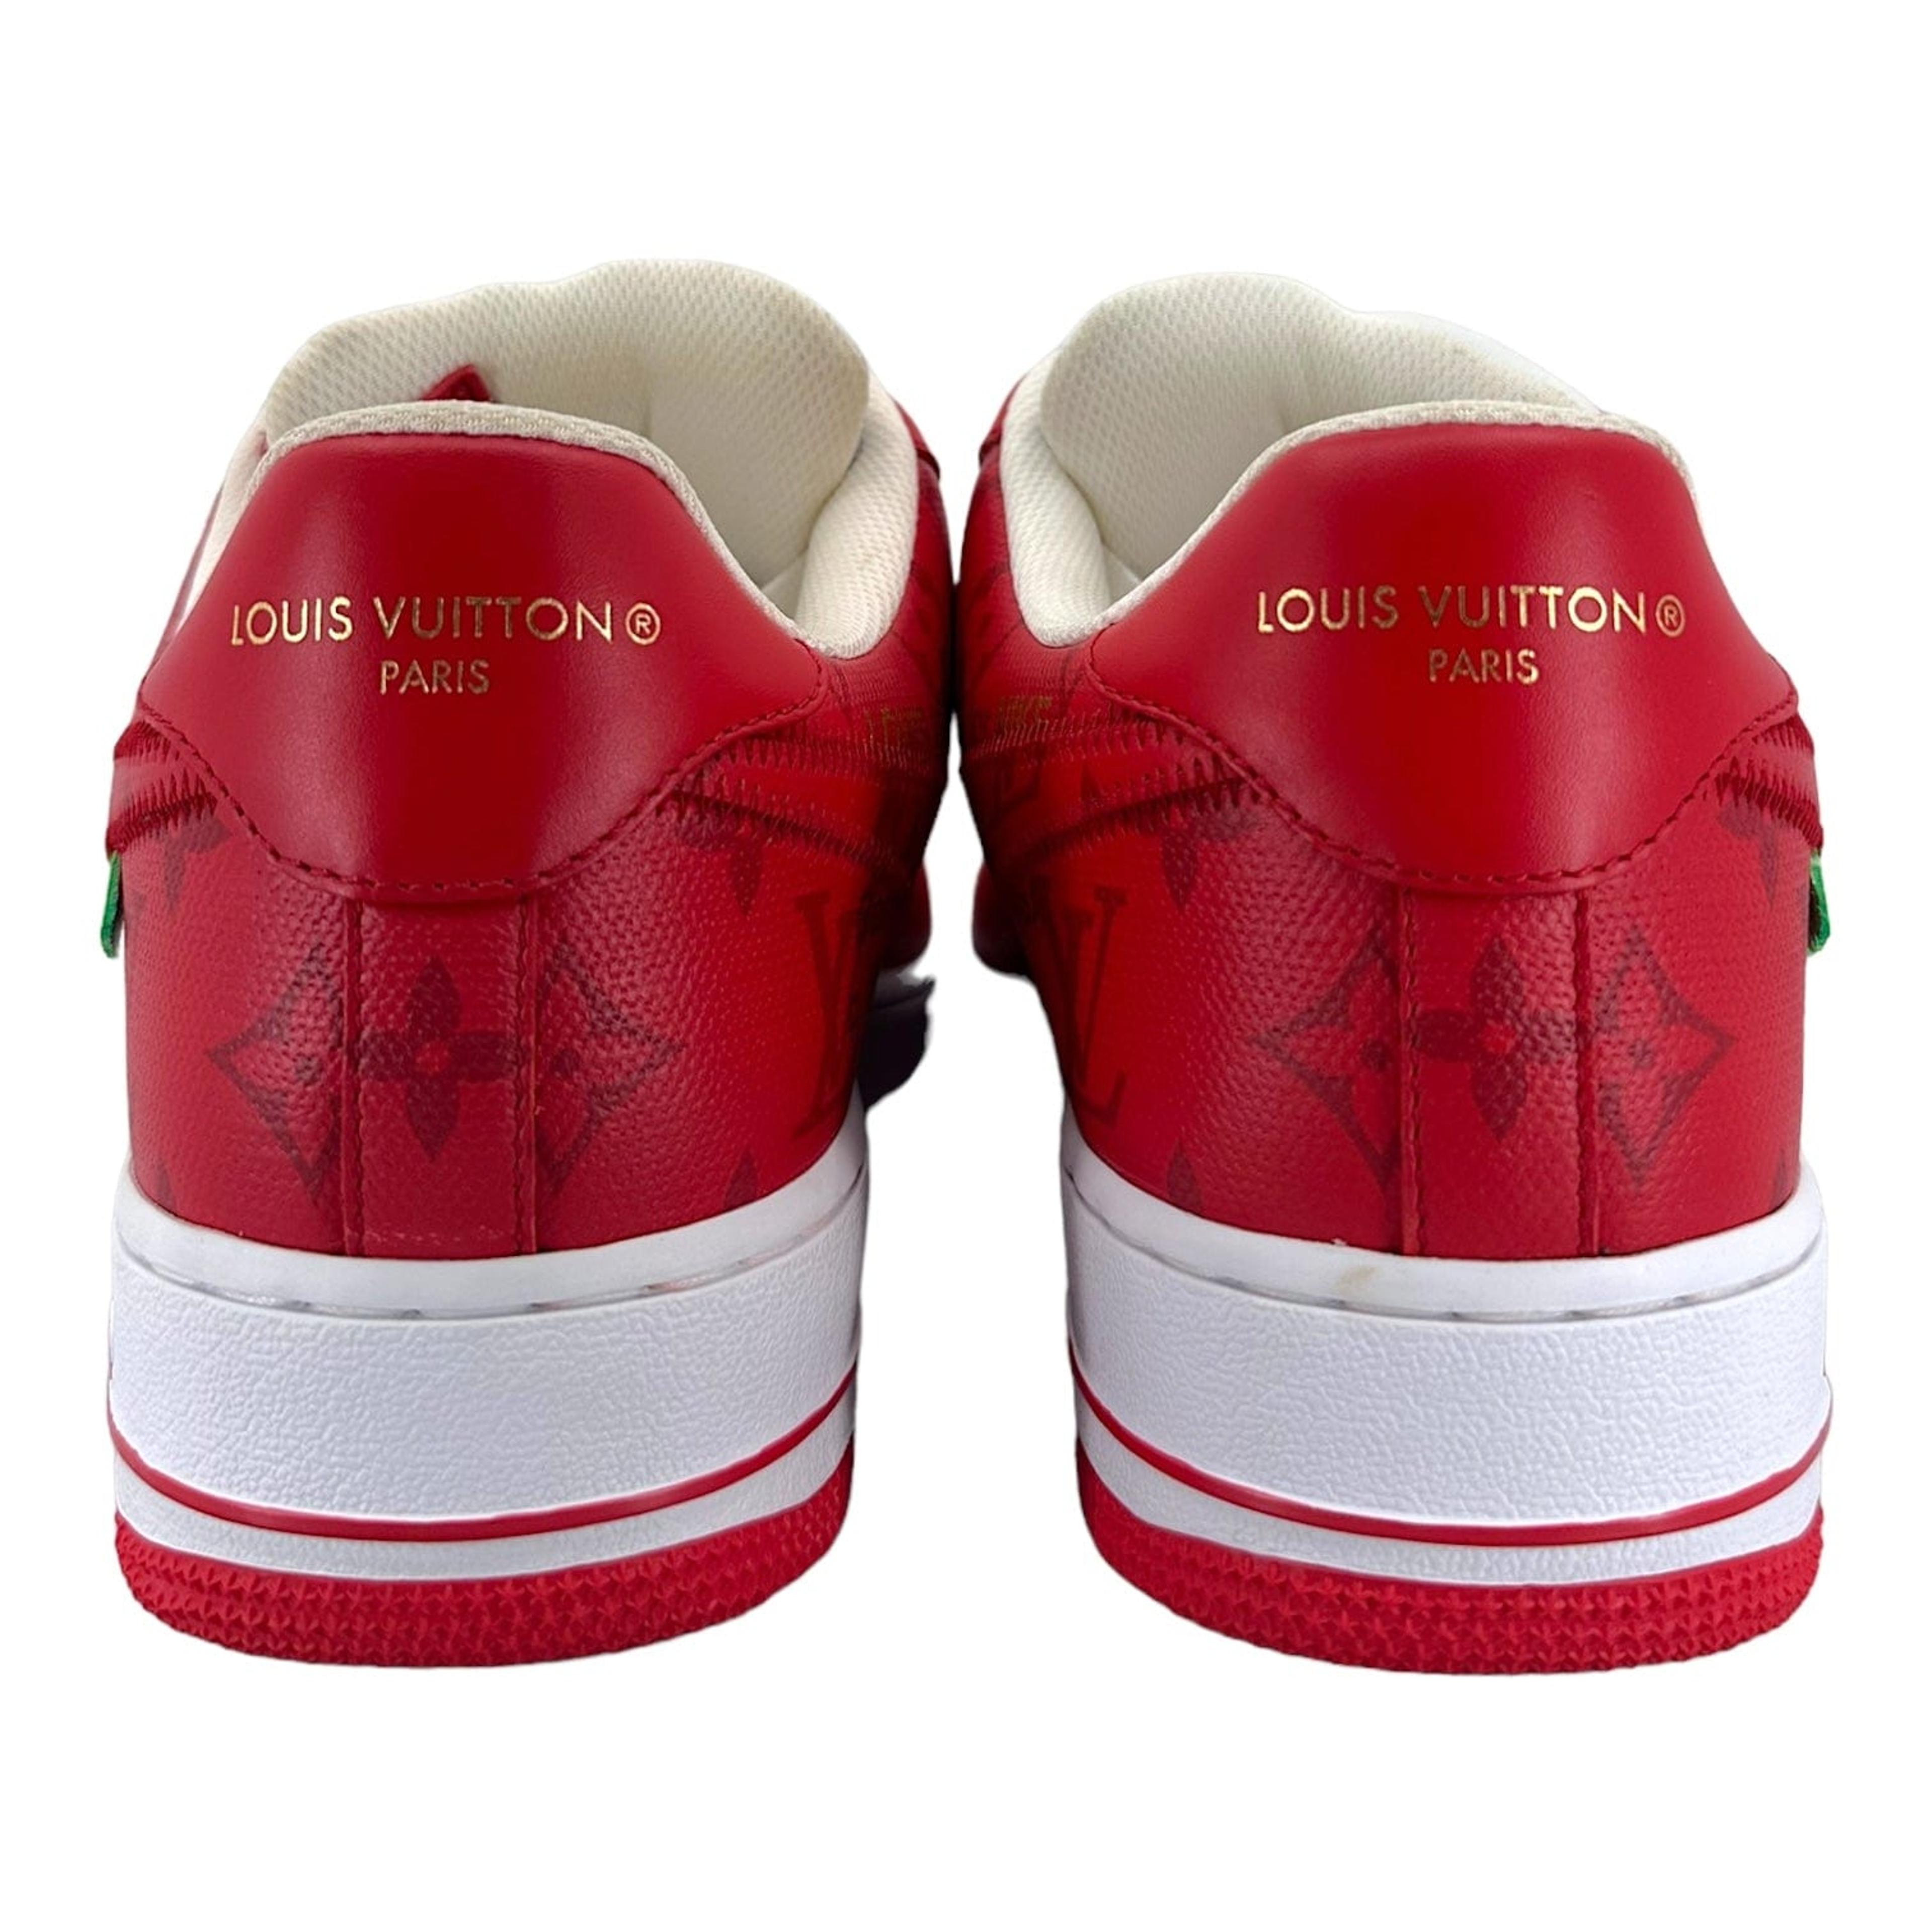 Alternate View 5 of Louis Vuitton x Nike Air Force 1 Low By Virgil Abloh White Red